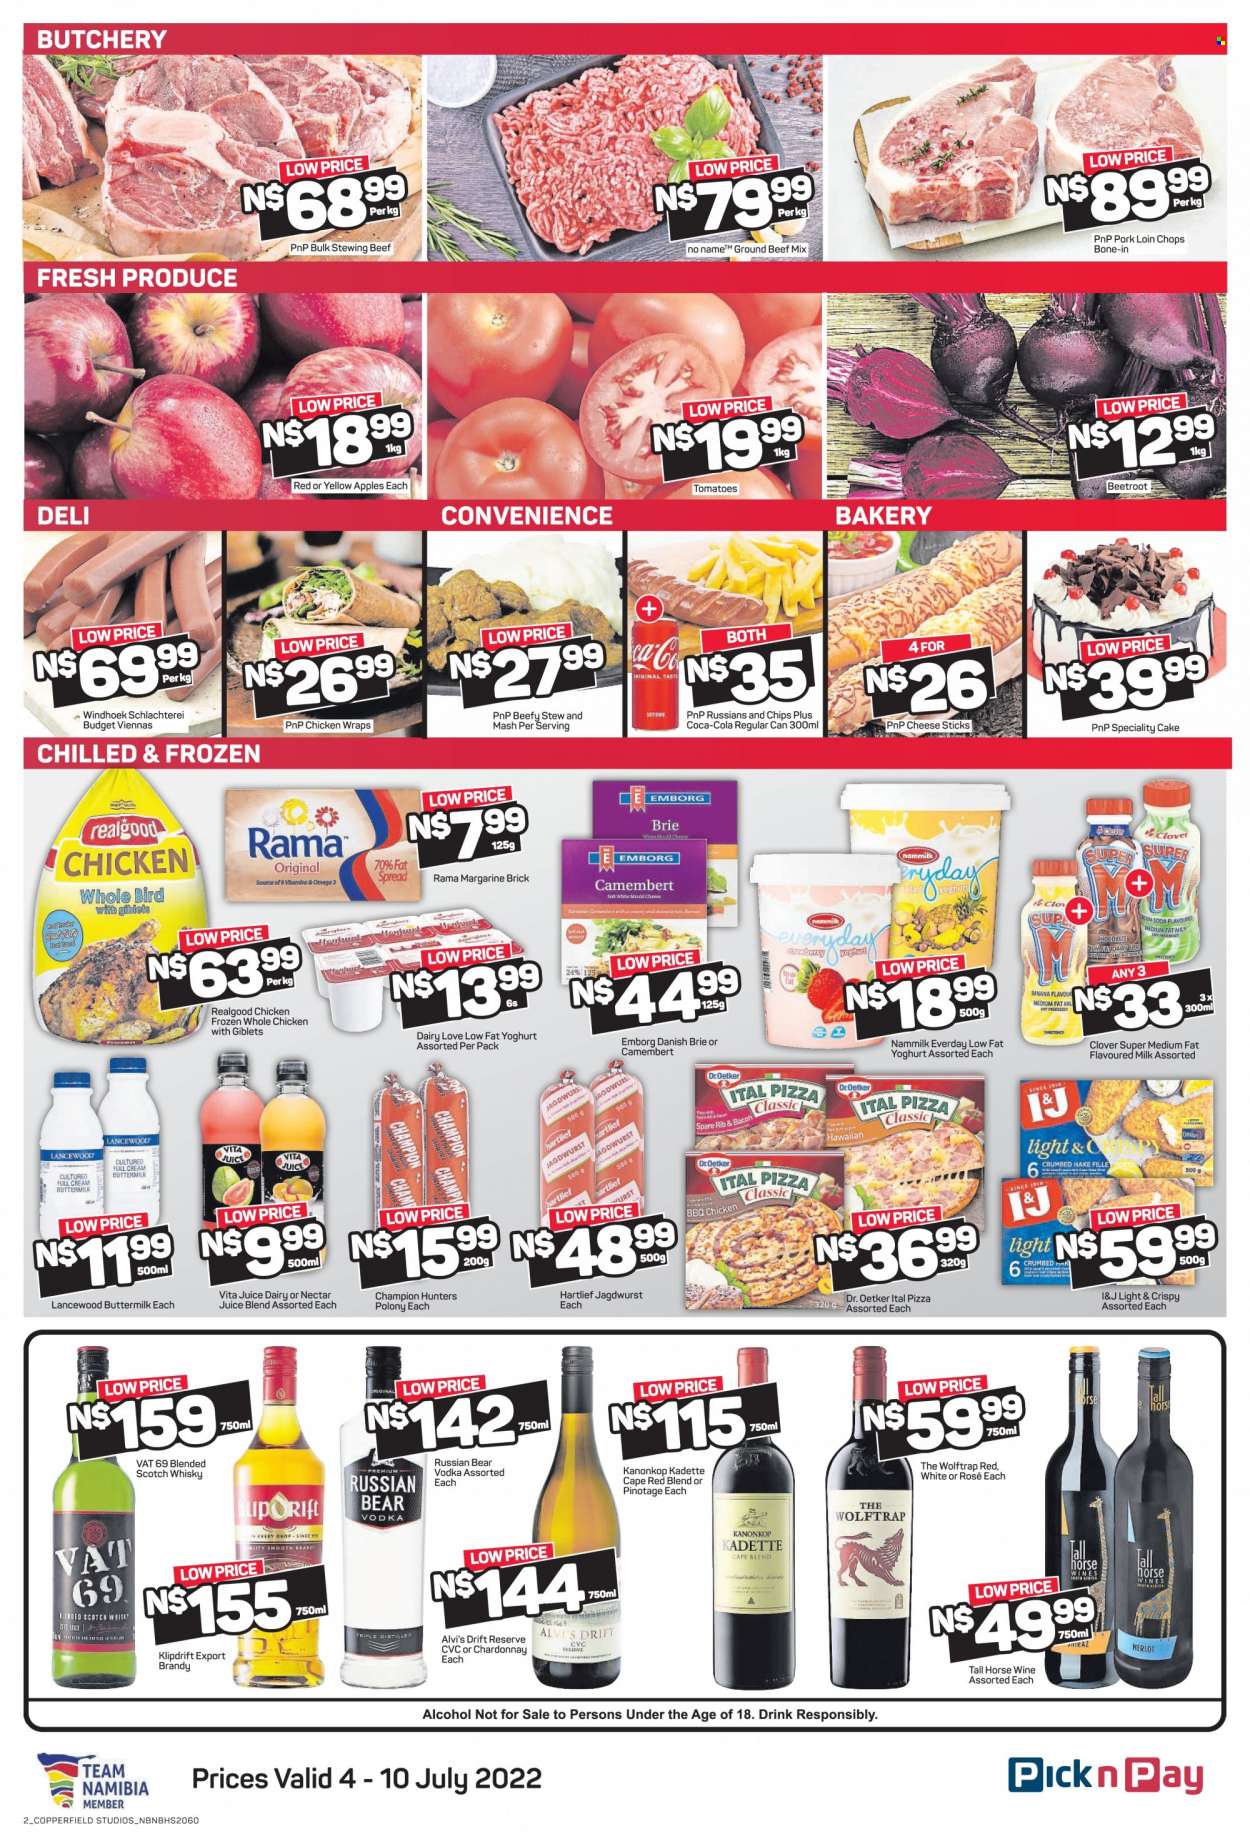 Pick n Pay catalogue  - 04/07/2022 - 10/07/2022 - Sales products - cake, wraps, beetroot, apples, hake, pizza, bacon, polony, vienna sausage, russians, camembert, brie cheese, Dr. Oetker, Lancewood, yoghurt, buttermilk, flavoured milk, margarine, fat spread, Rama, cheese sticks, Ital Pizza, chocolate, Coca-Cola, juice, soda, red wine, white wine, Chardonnay, wine, Merlot, alcohol, Kanonkop Kadette, rosé wine, brandy, vodka, Russian Bear, Klipdrift, Vat 69, scotch whisky, whisky, whole chicken, beef meat, ground beef, stewing beef, pork chops, pork loin, pork meat. Page 2.